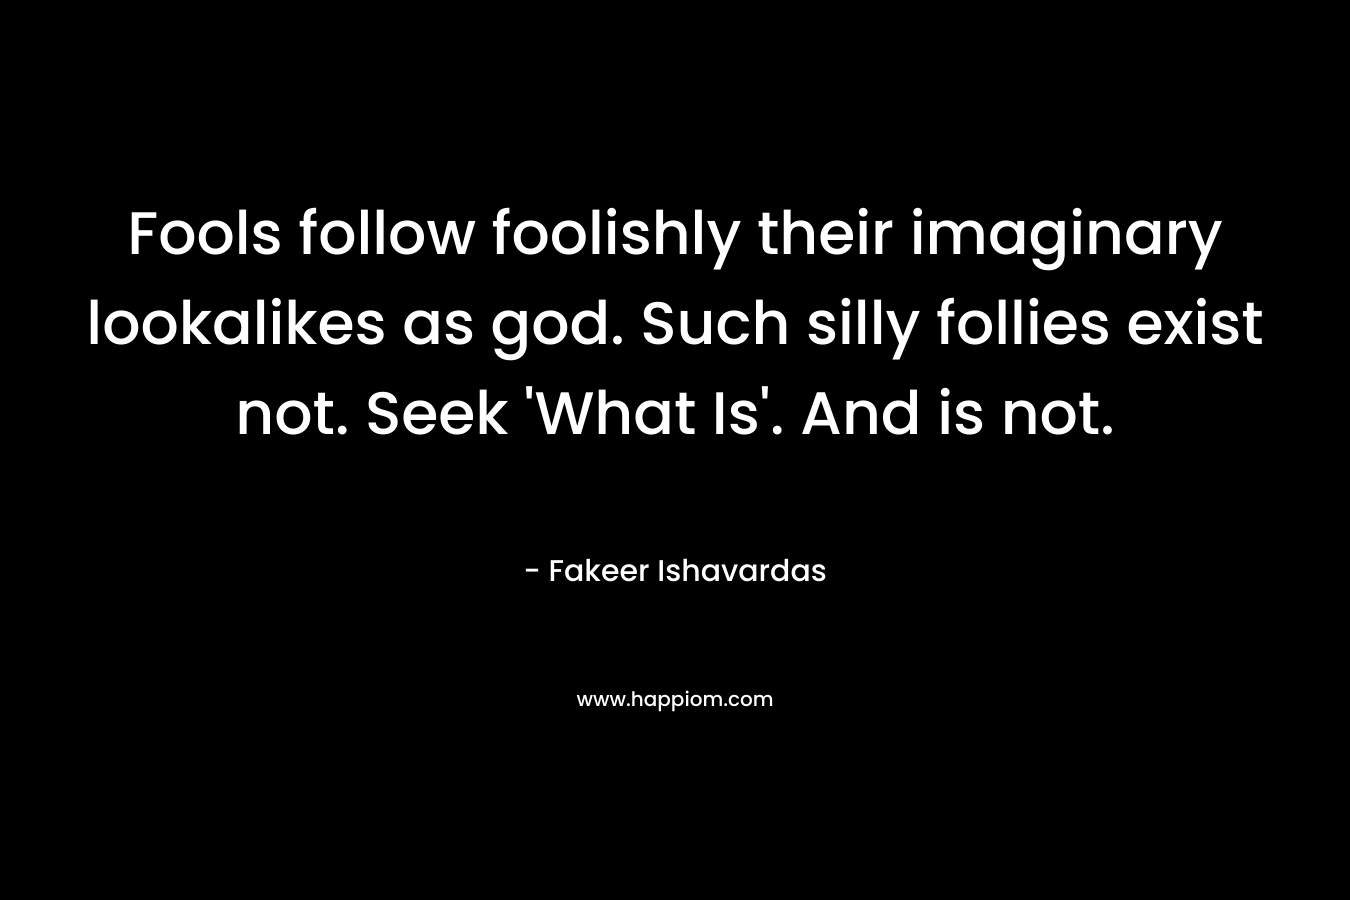 Fools follow foolishly their imaginary lookalikes as god. Such silly follies exist not. Seek 'What Is'. And is not.